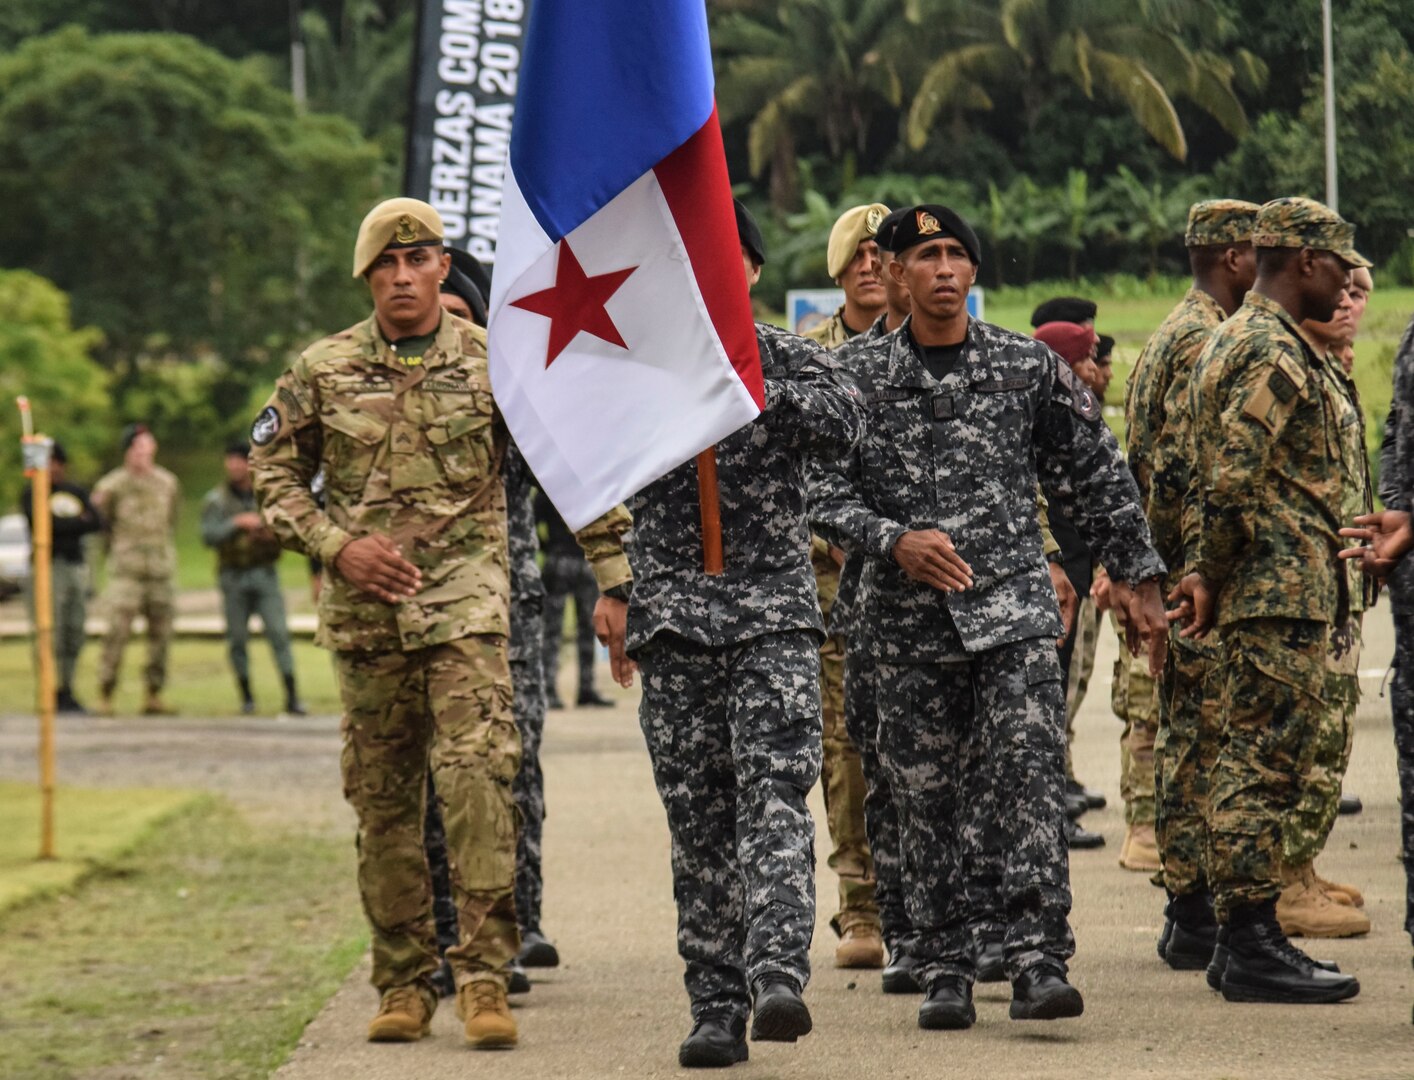 Panamanian Comandos return to their place after passing the torch during the opening ceremony for Fuerzas Comando